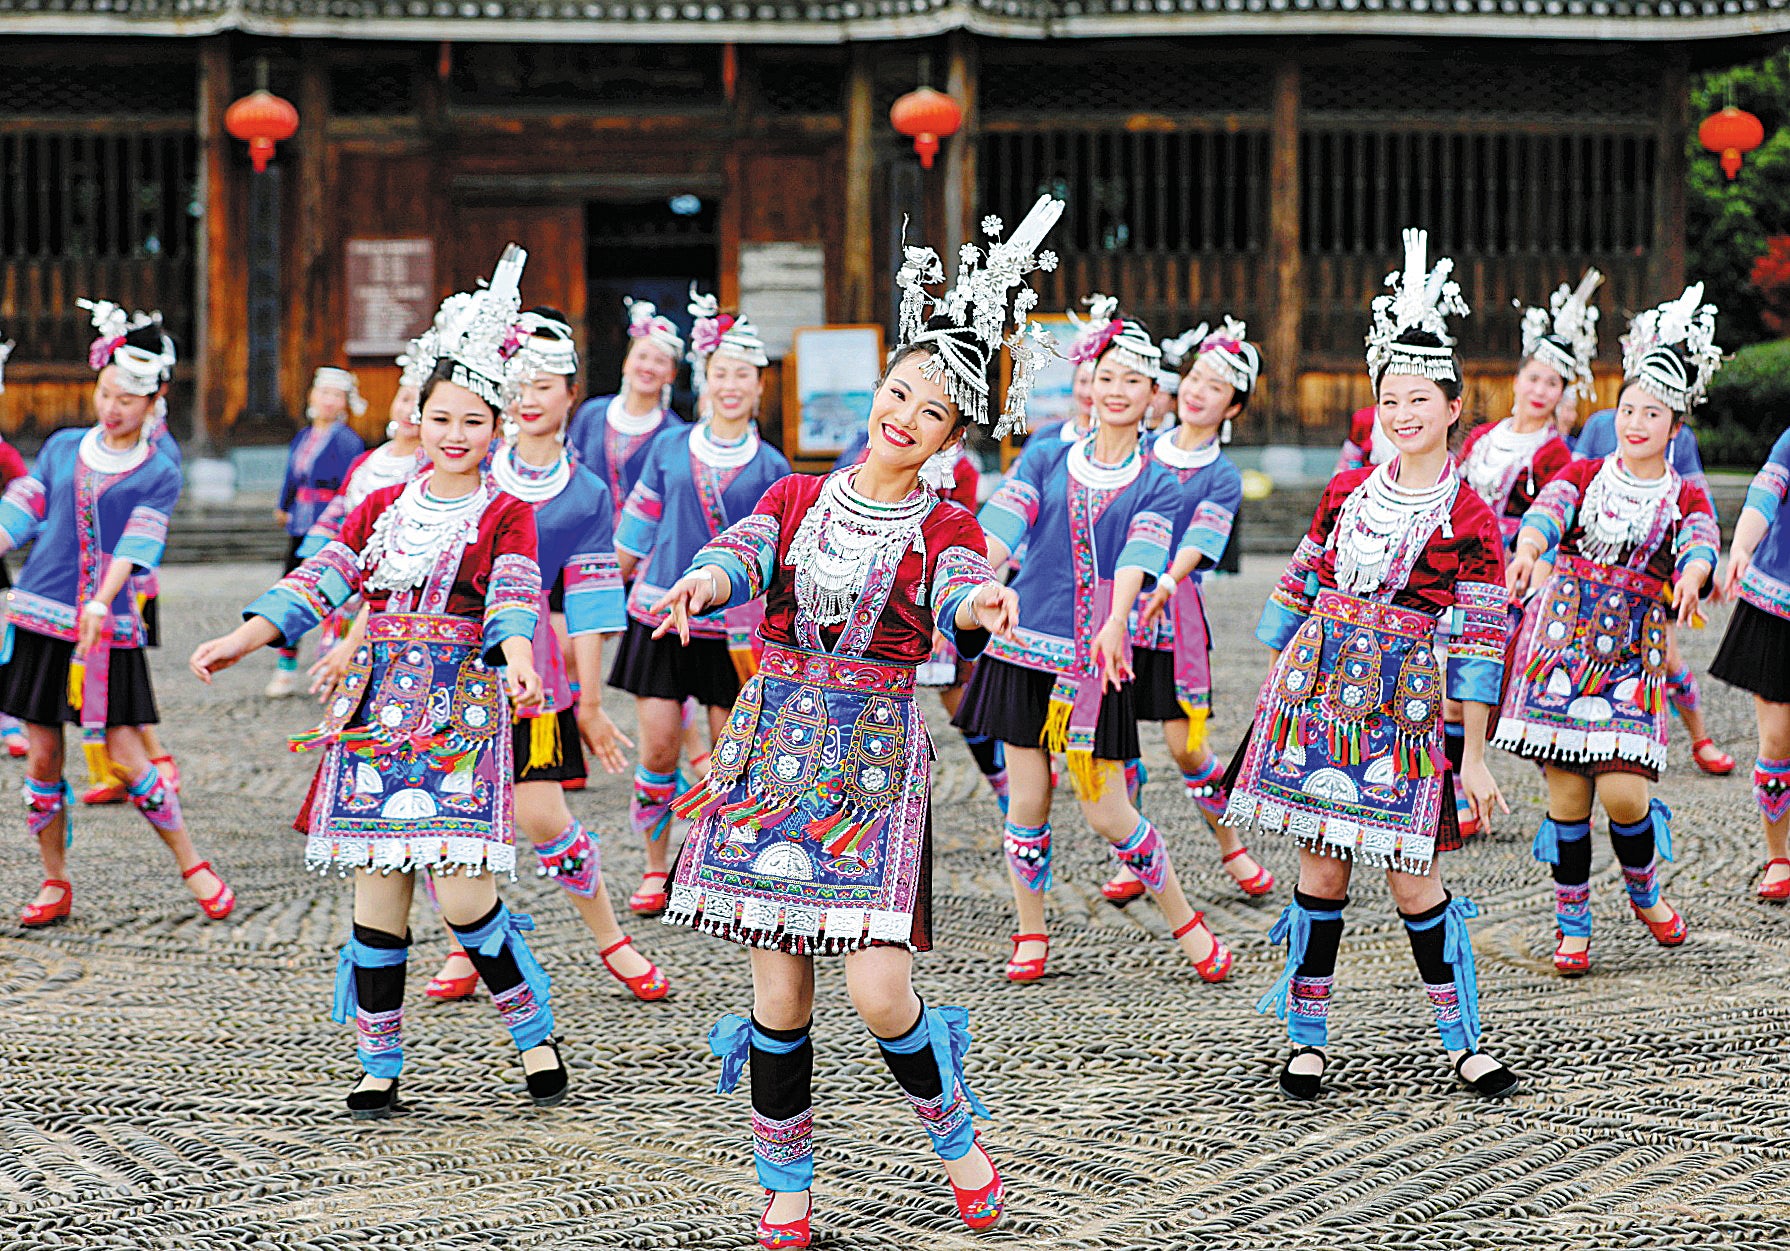 Members of the Dong ethnic group perform the Grand Song of Dong in Sanjiang Dong autonomous county, Guangxi Zhuang autonomous region